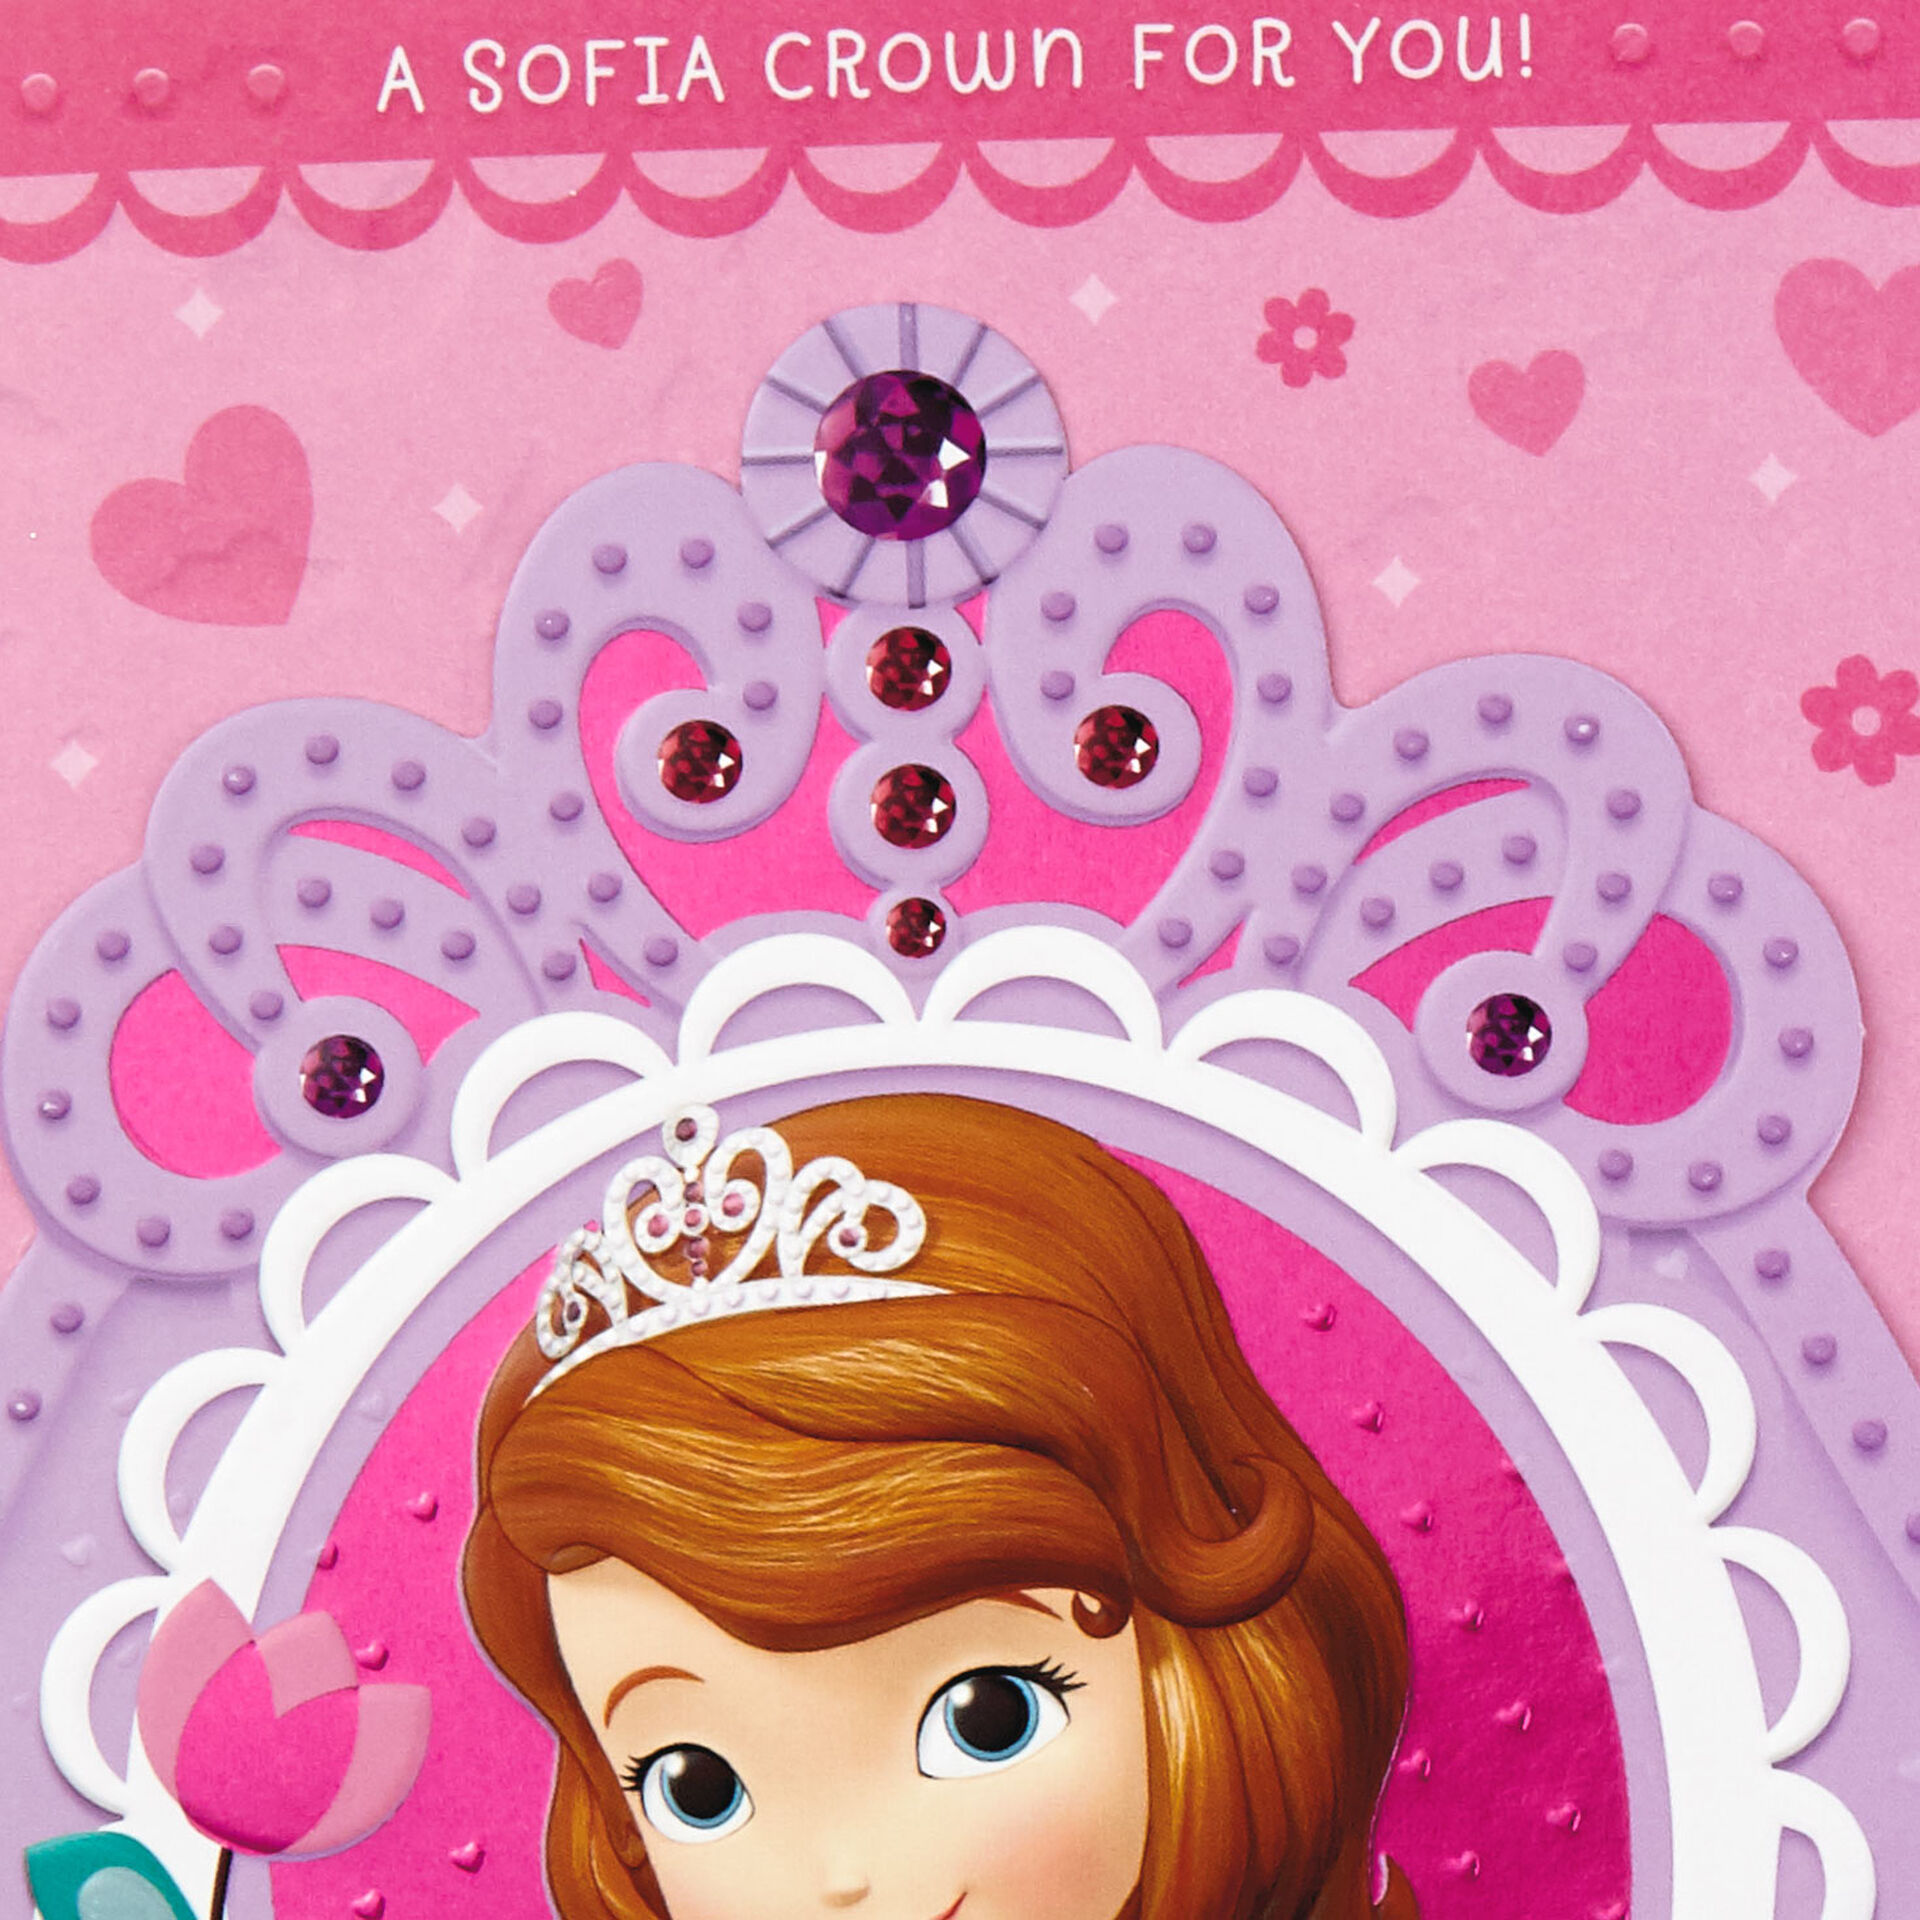 Sofia The First 3rd Birthday Card With Detachable Crown Greeting Cards Hallmark